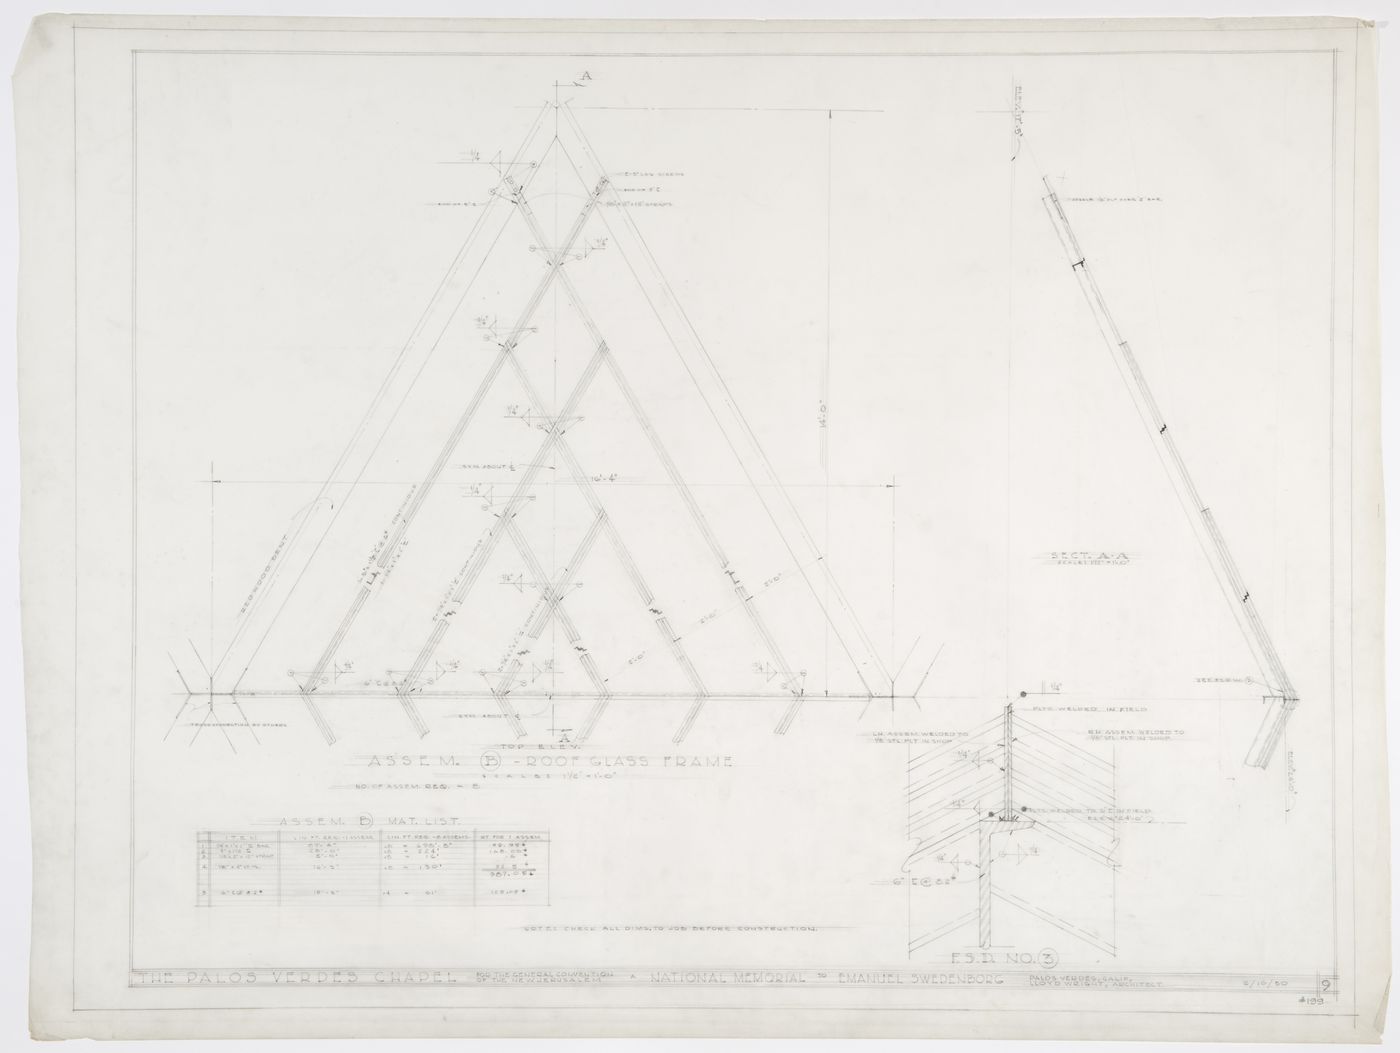 Wayfarers' Chapel, Palos Verdes, California: Plan and sections for assembly of glass frame for roof